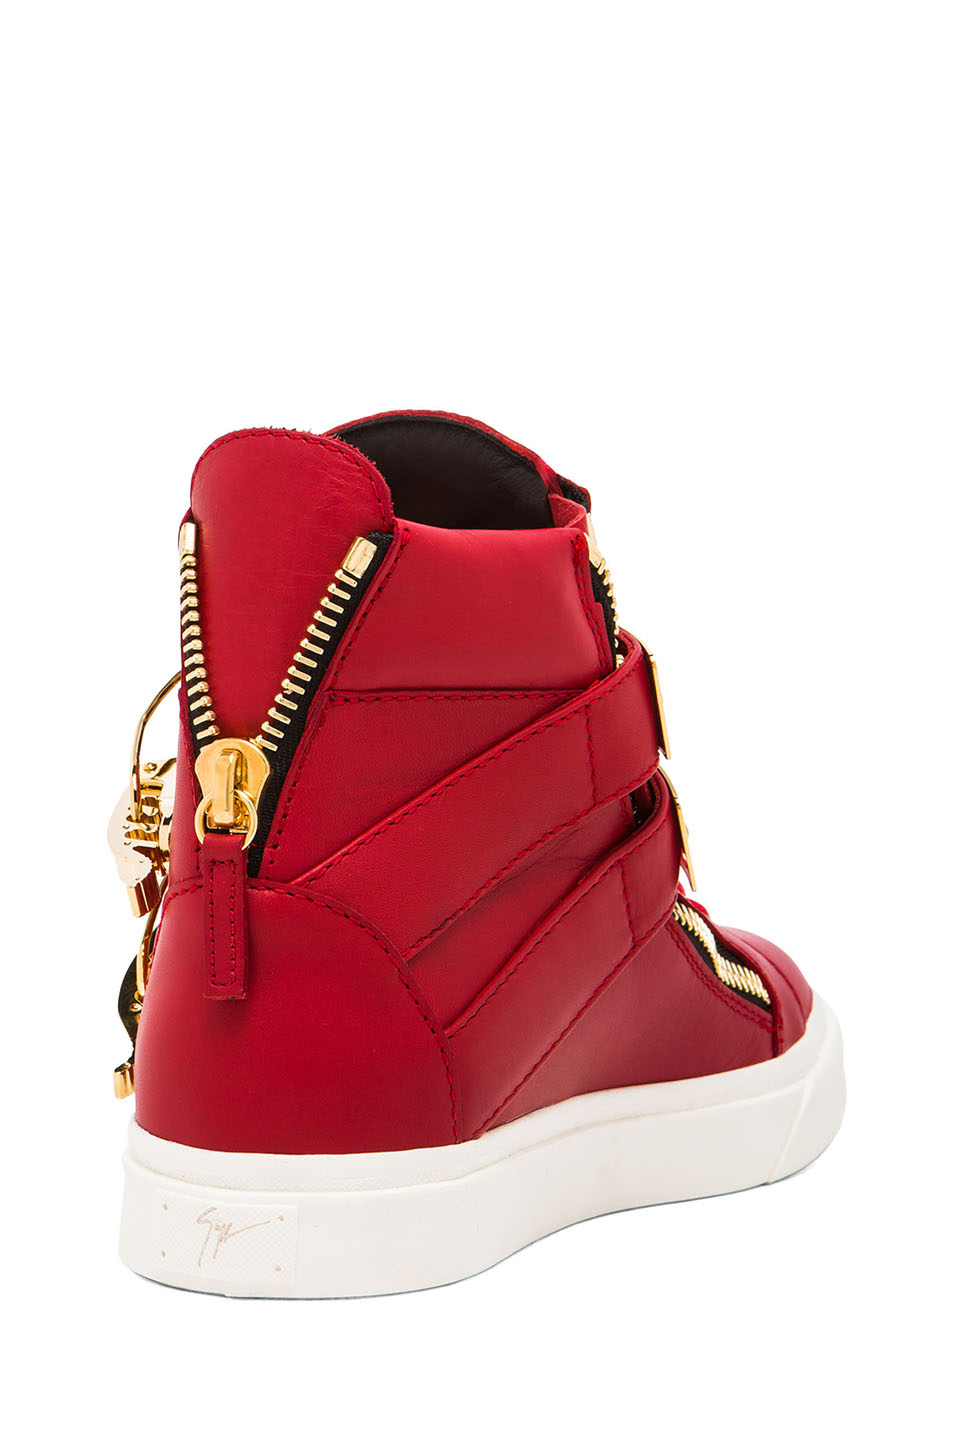 Lyst - Giuseppe Zanotti Buckled London Leather Sneakers in Red